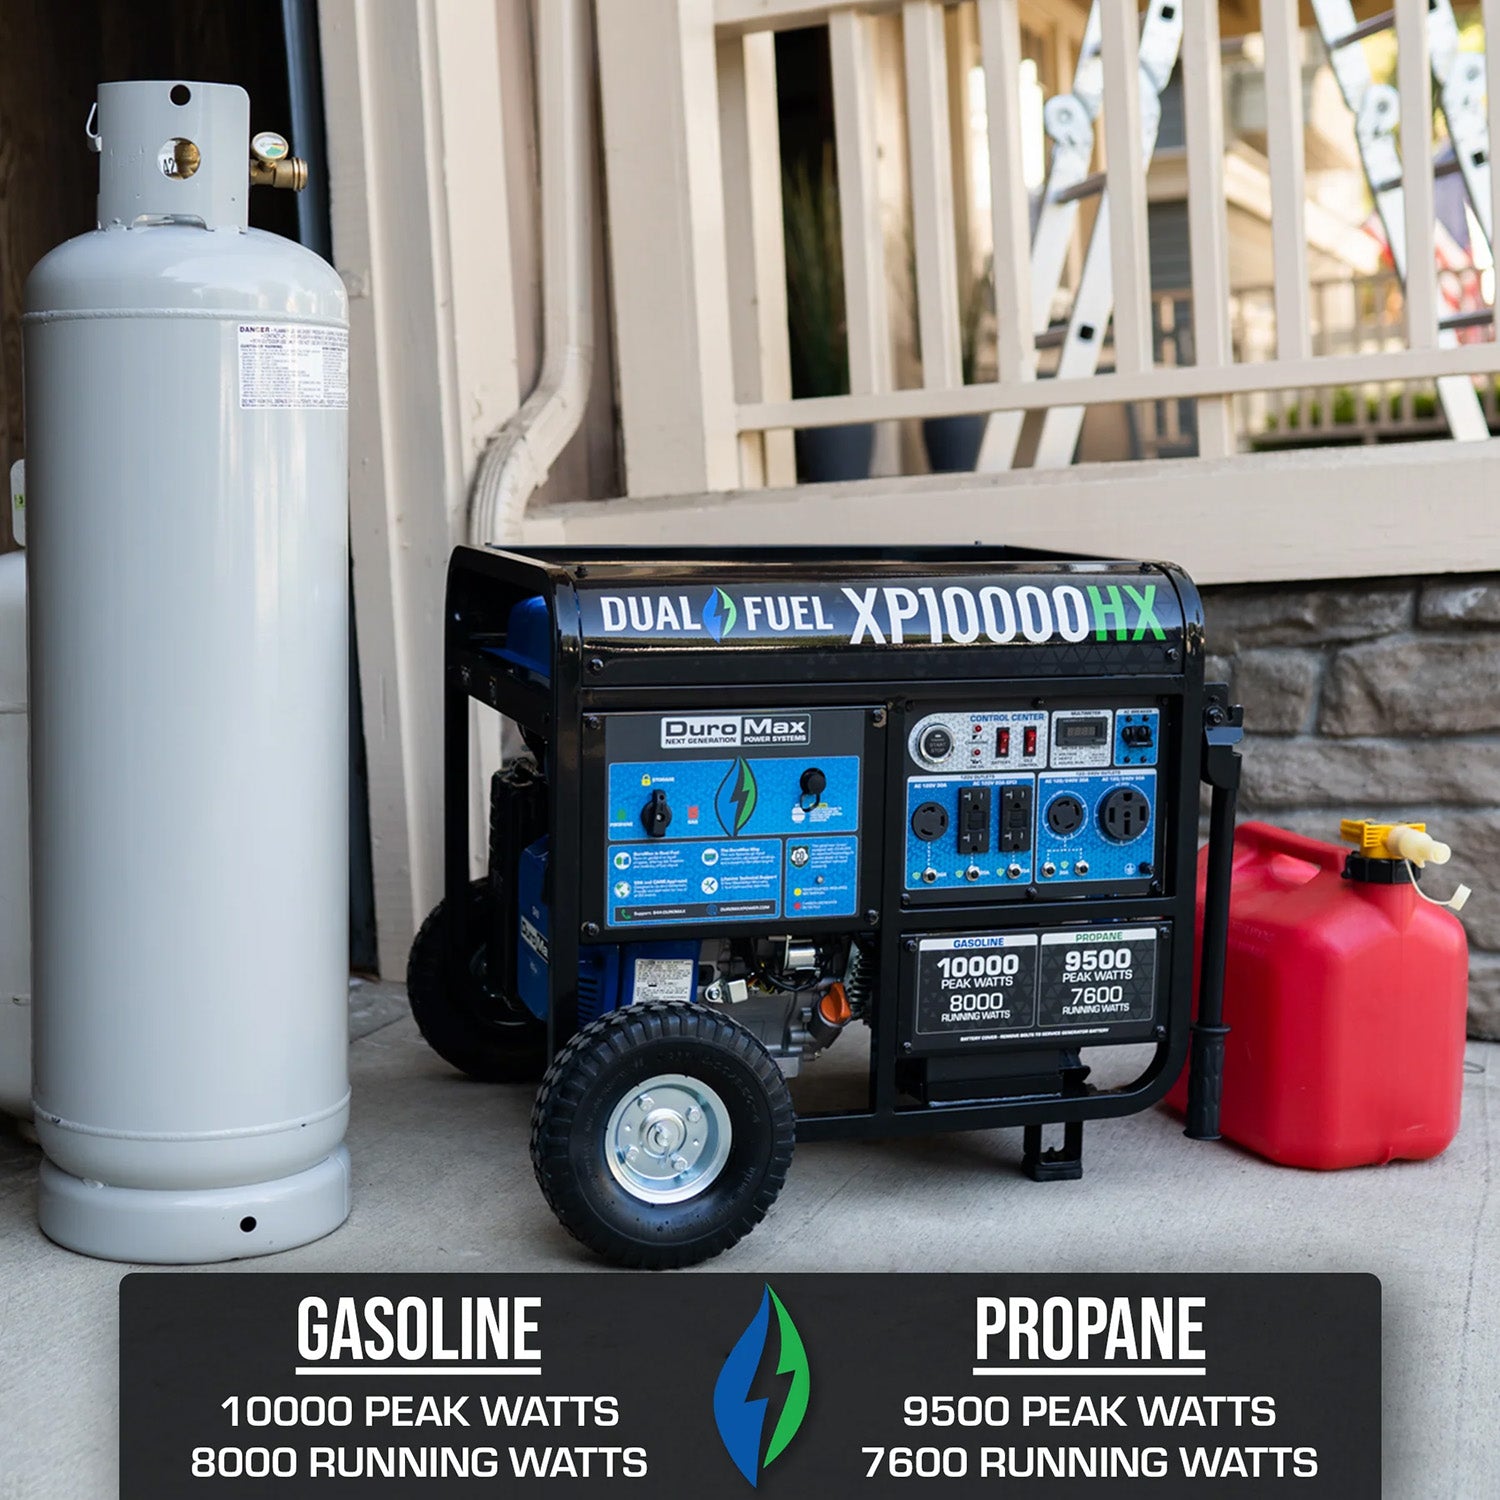 DuroMax XP10000HX Generator - A Dual Fuel Generator That Uses Gasoline and Propane